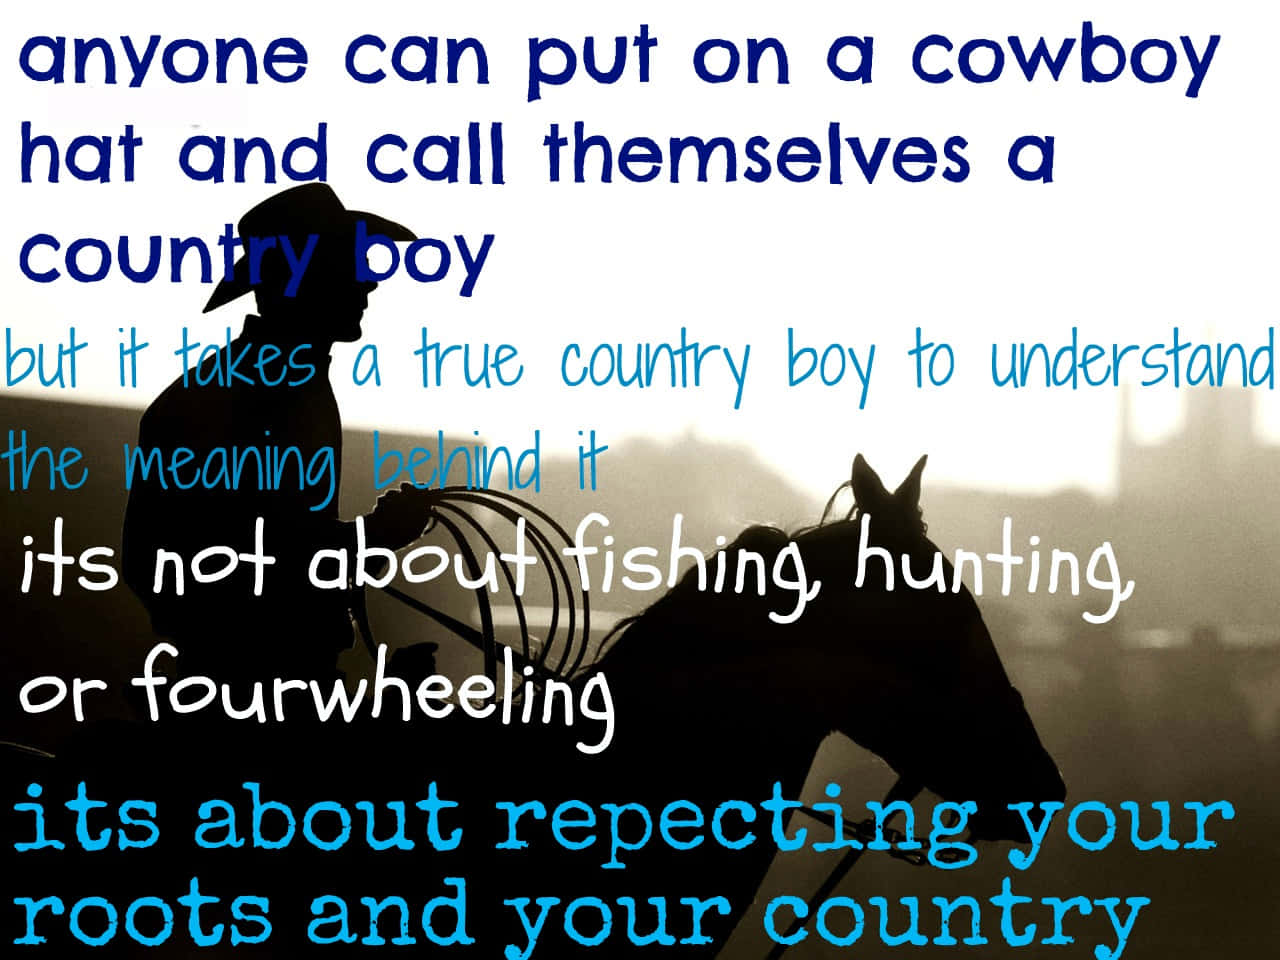 Cute Country Cowboy Quote Wallpaper